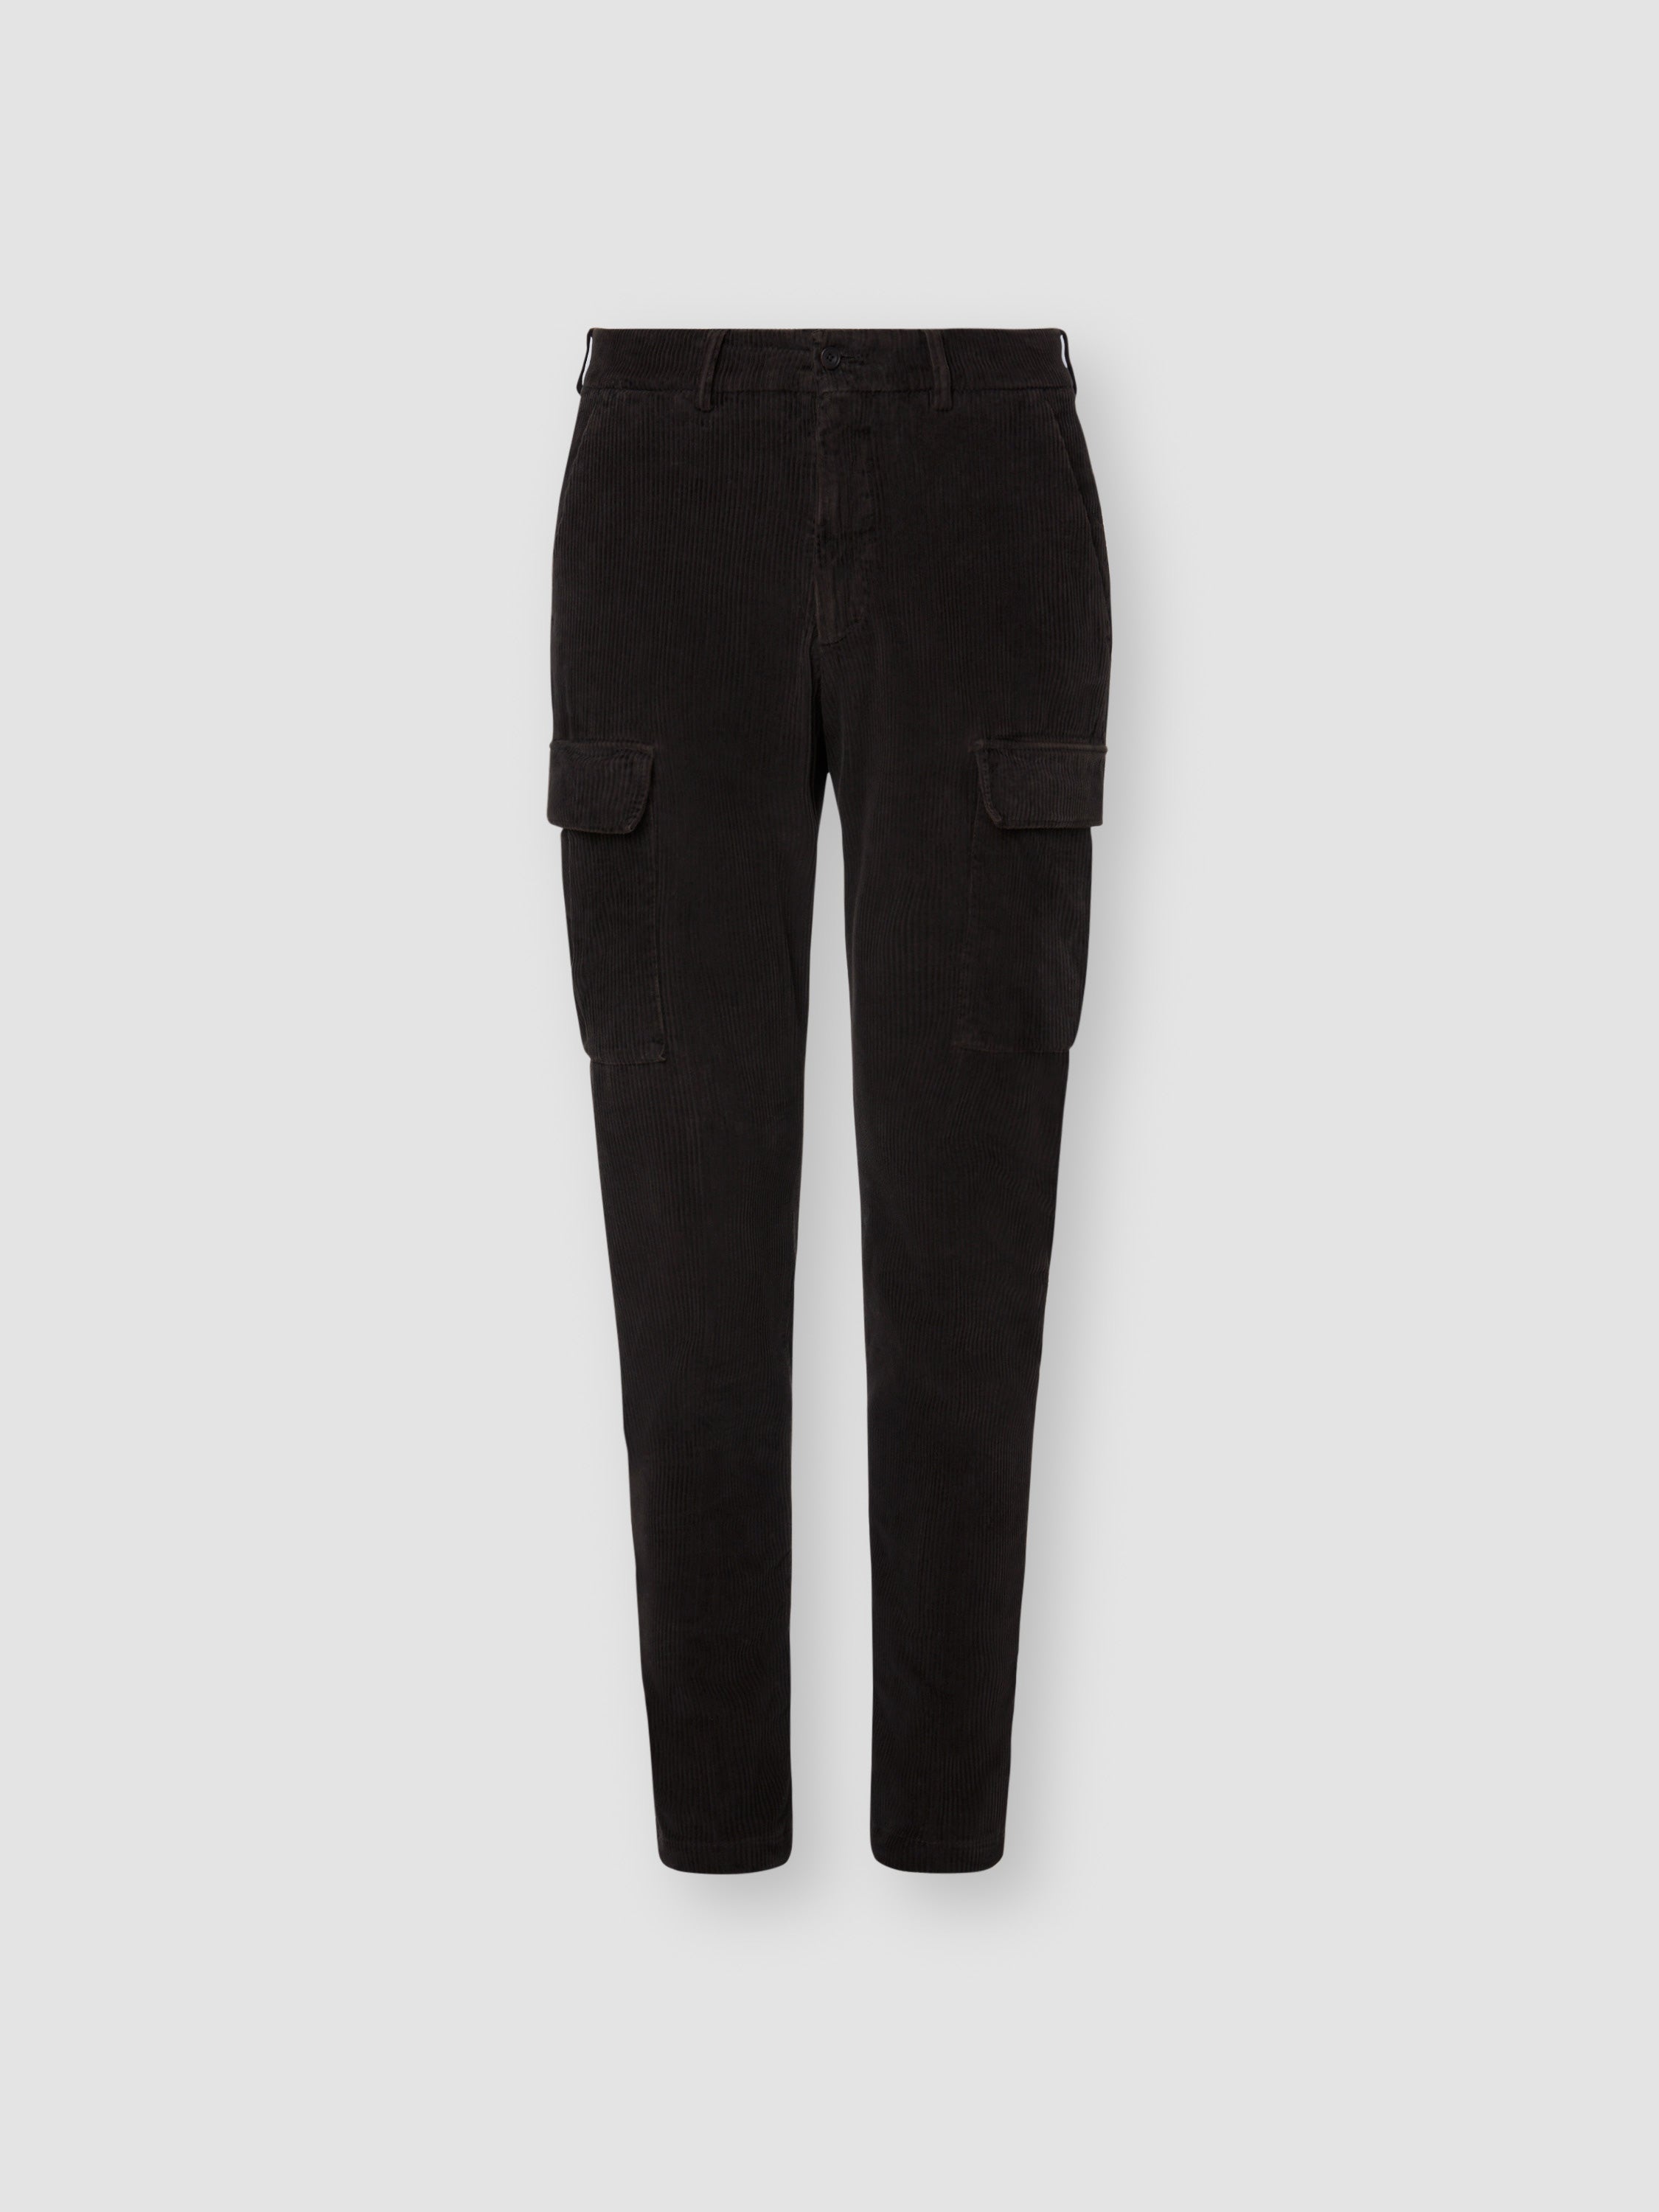 Corduroy Cargo Trousers Dark Brown Product Image